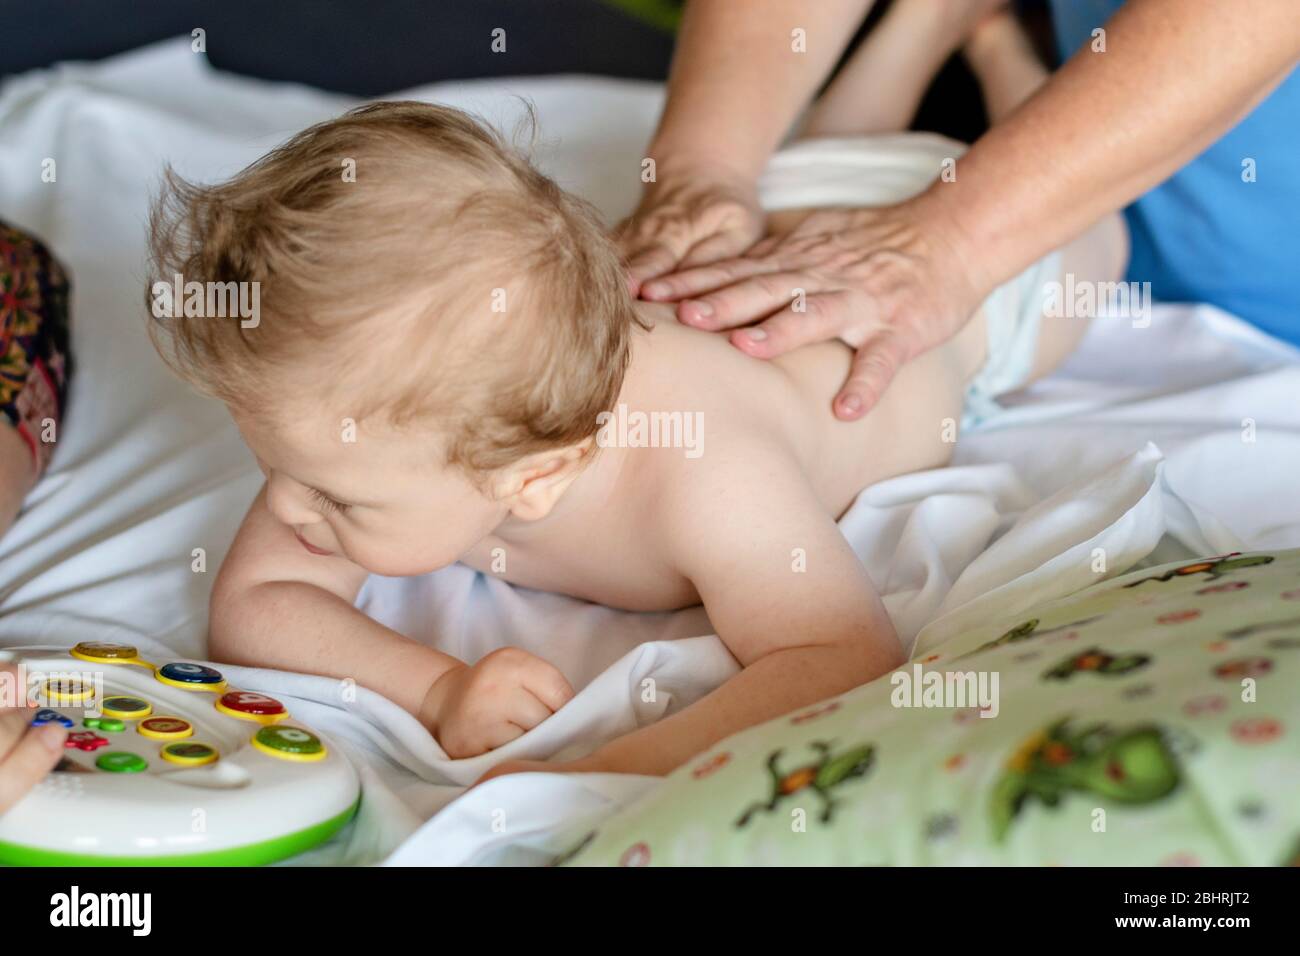 Baby having back massage in a rehabilitation center. Little child on therapy. Massage therapist massaging a baby. Stock Photo